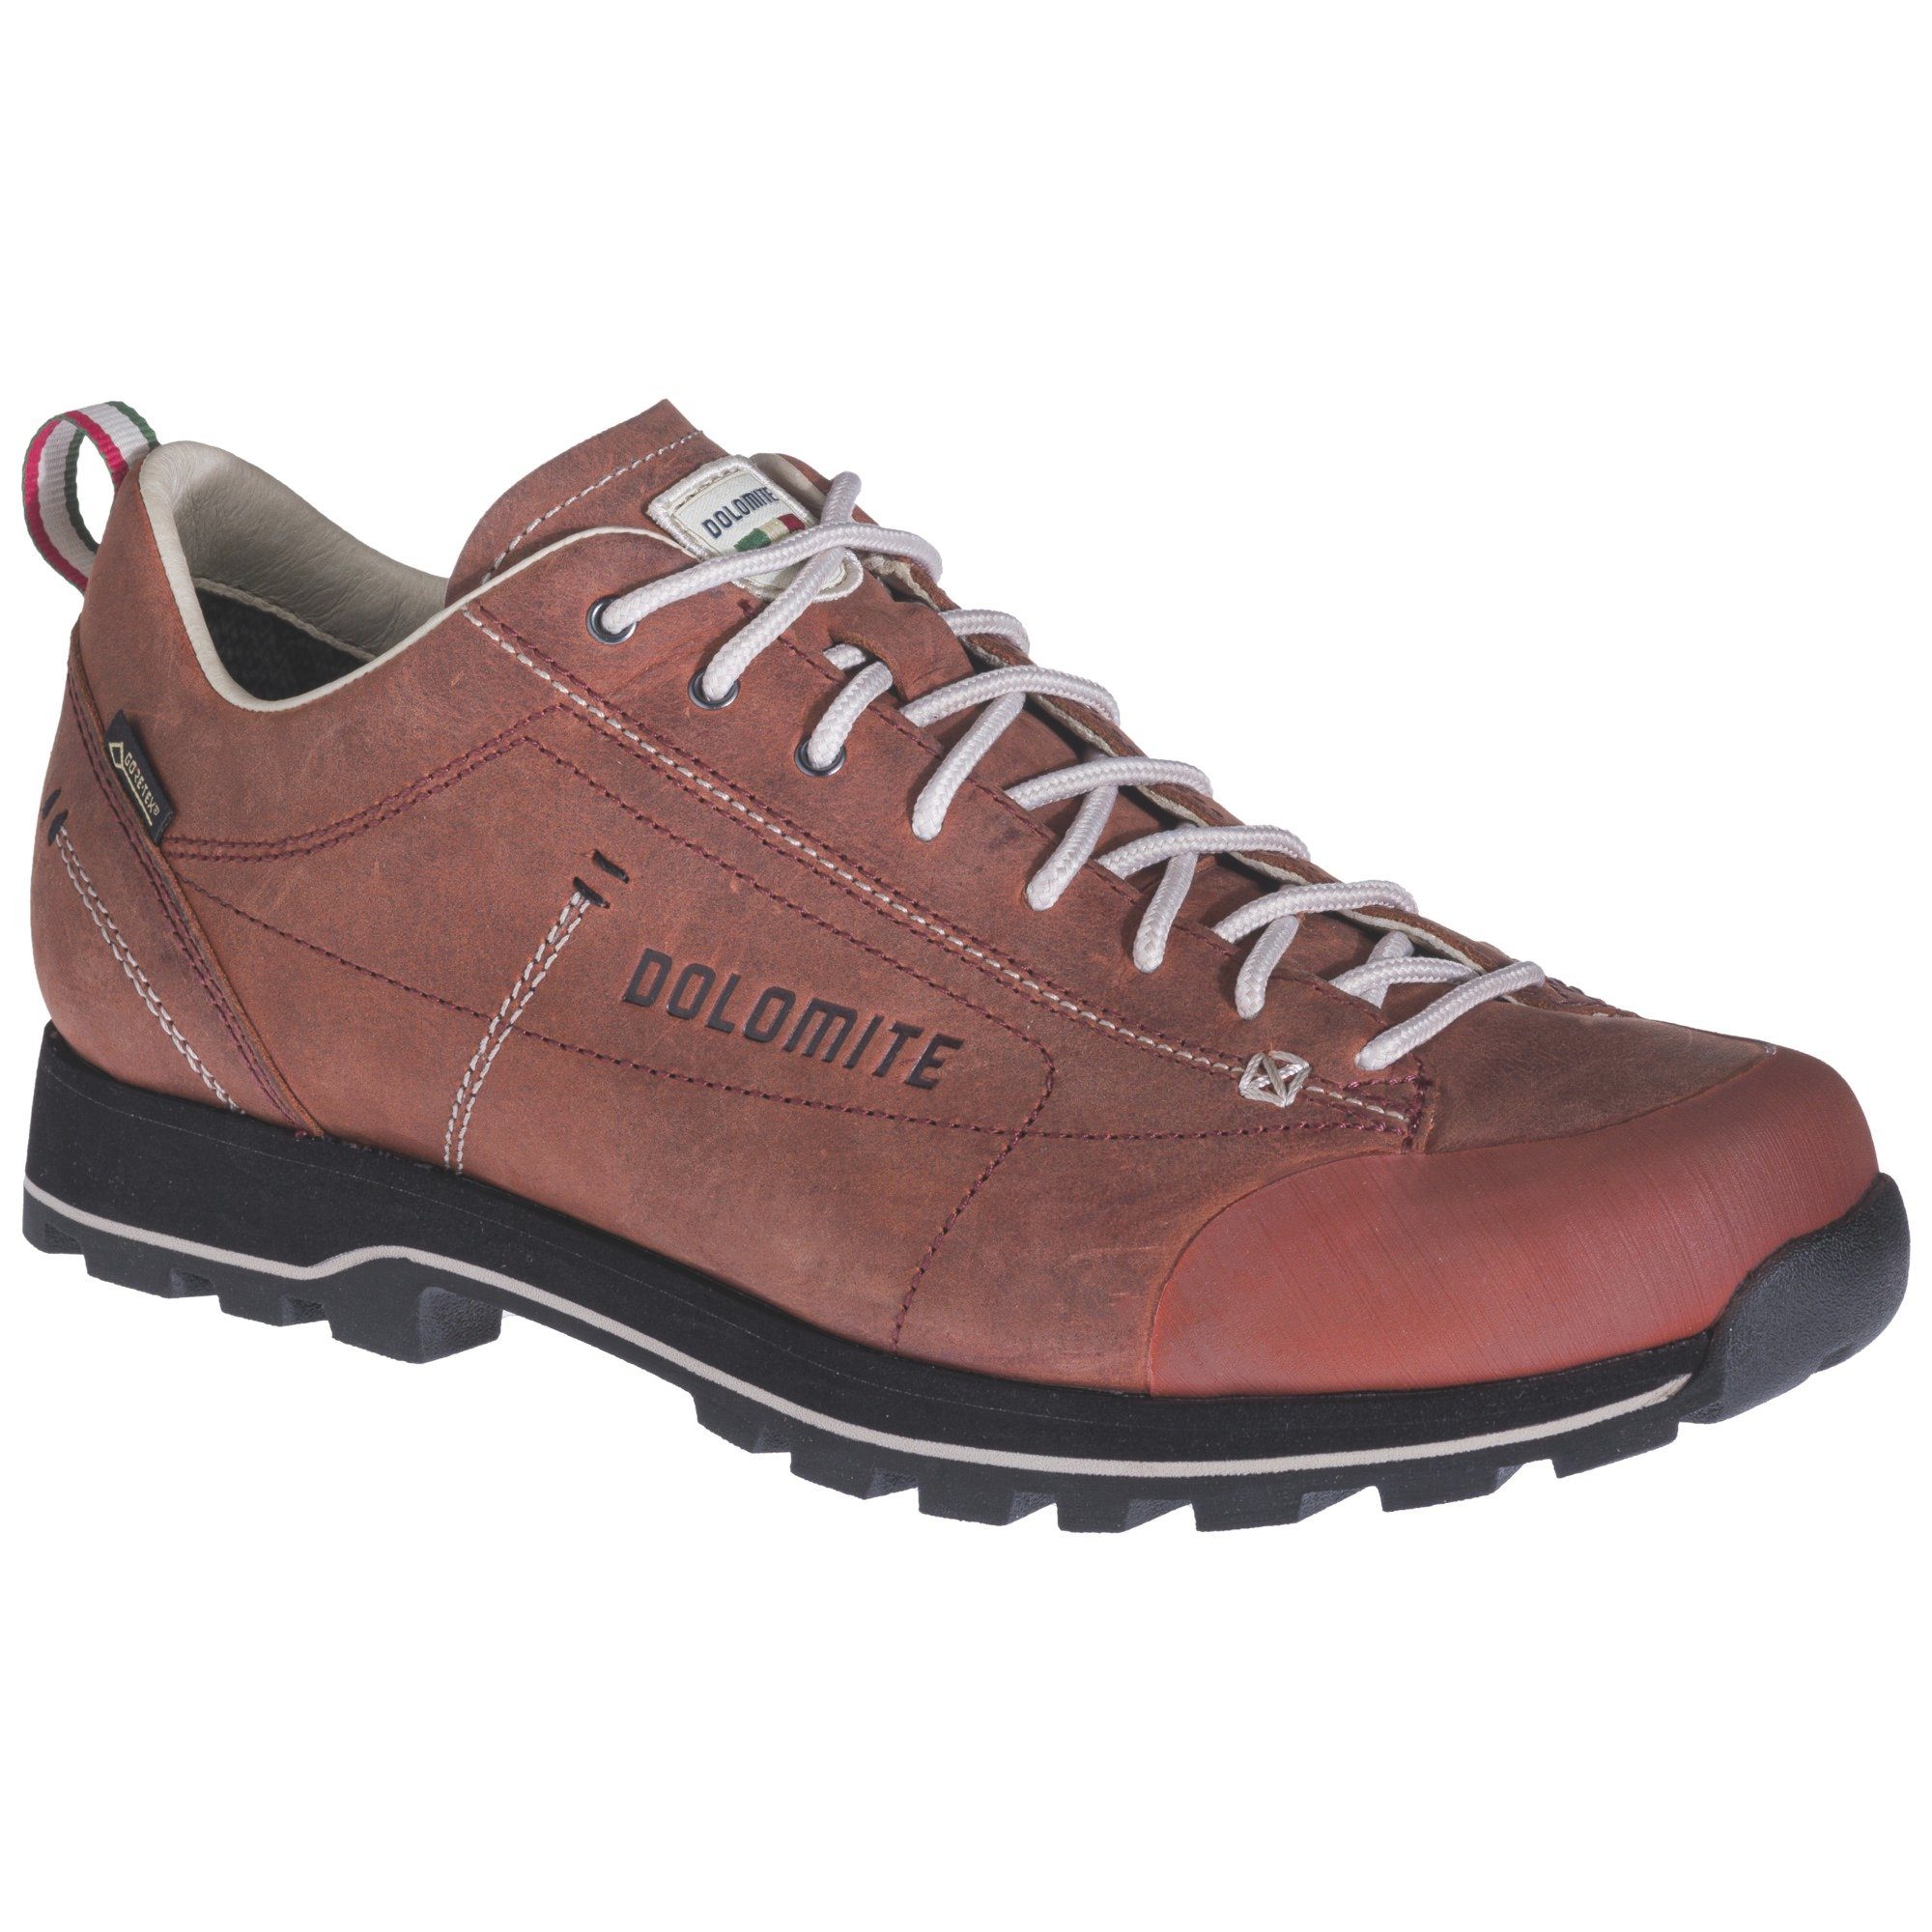 Ginger Shoe Cinquantaquattro Outdoorschuh Red Dolomite Fg Gt DOL Low Dolomite